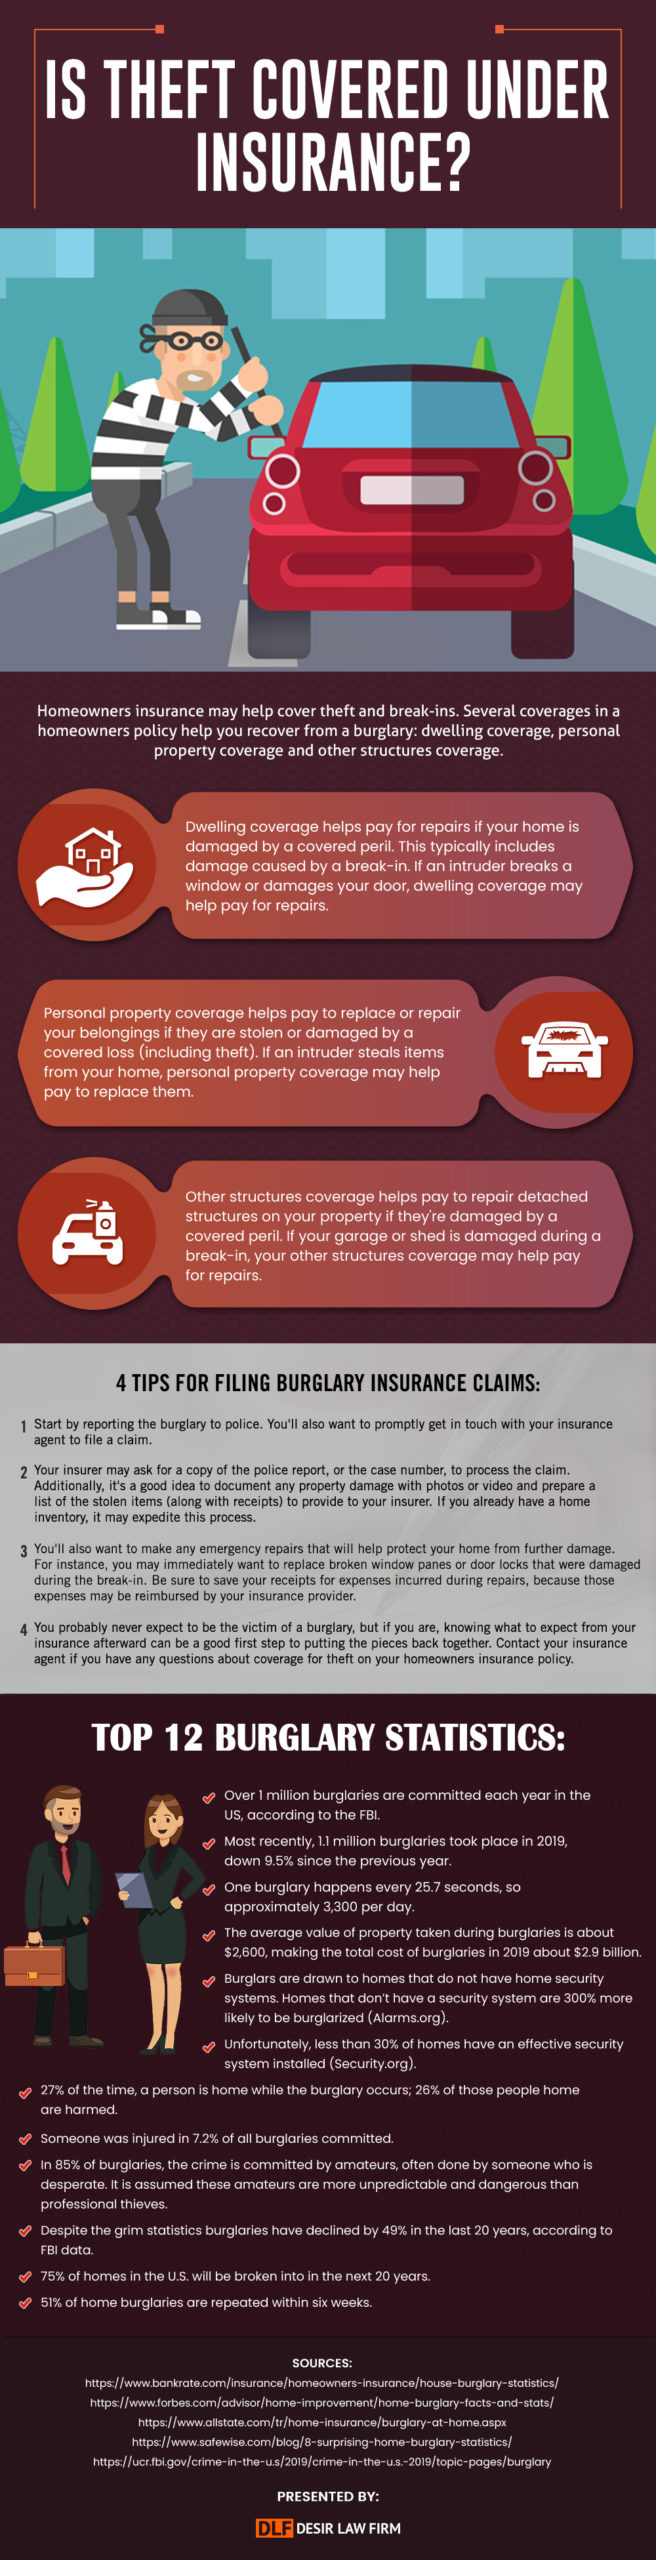 [Infographic] Is Theft Covered Under Insurance?